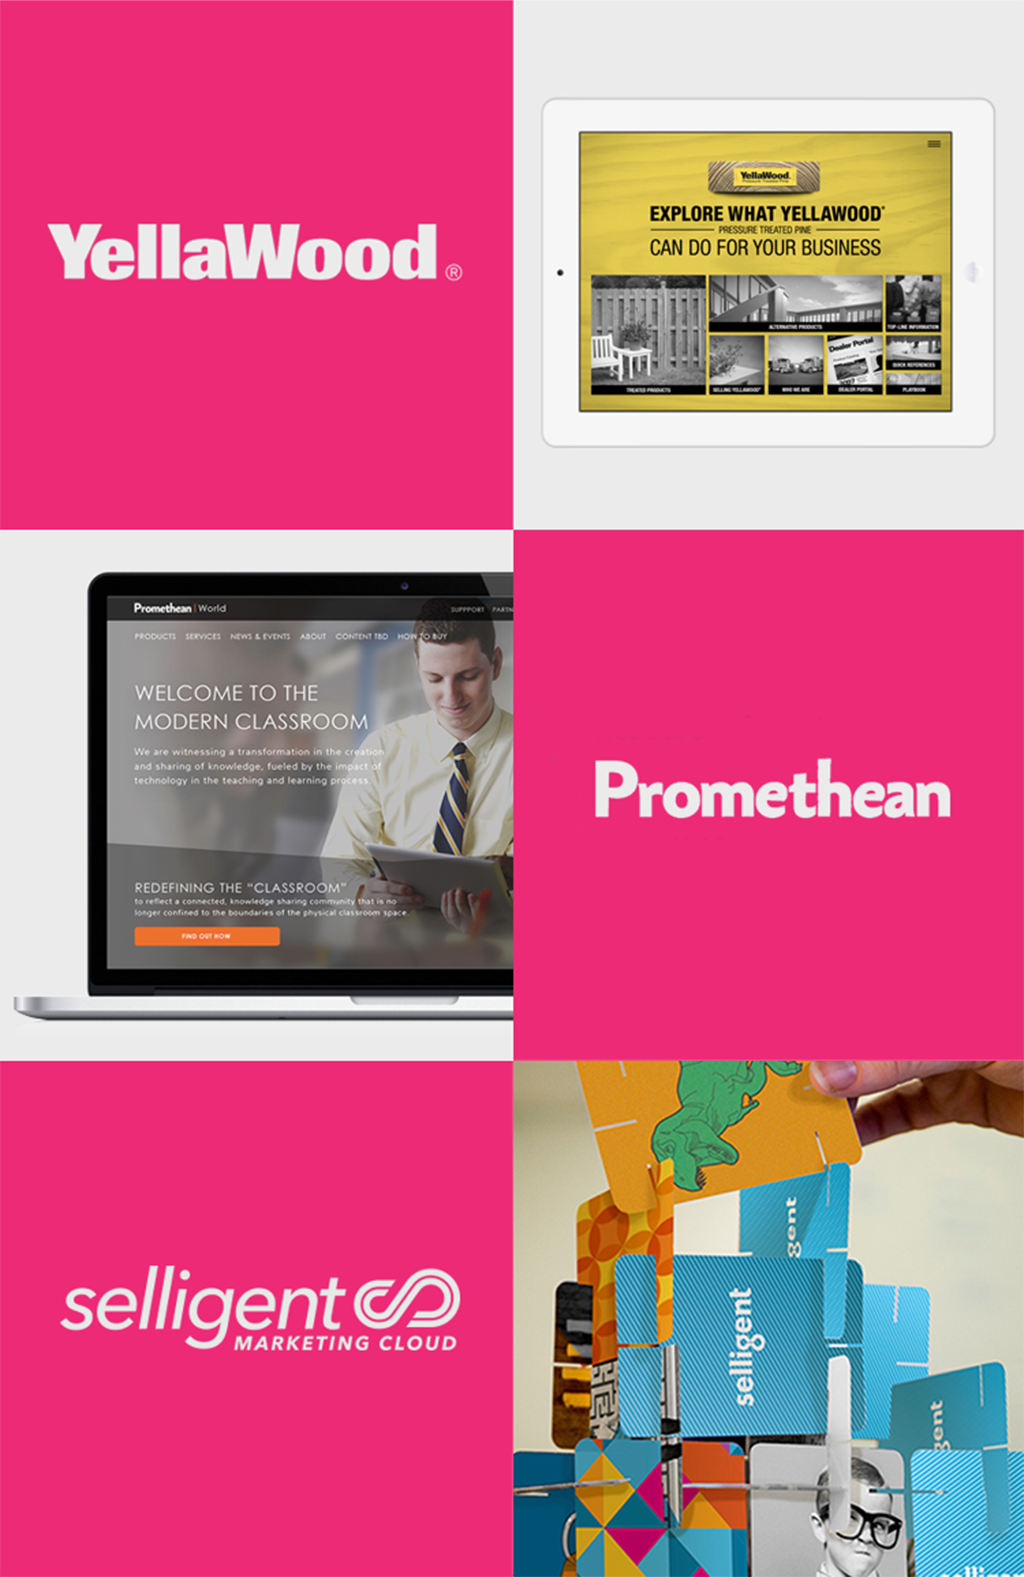 six images consisting of Yellawood, Promethean, and Selligent logos with an accompanying image